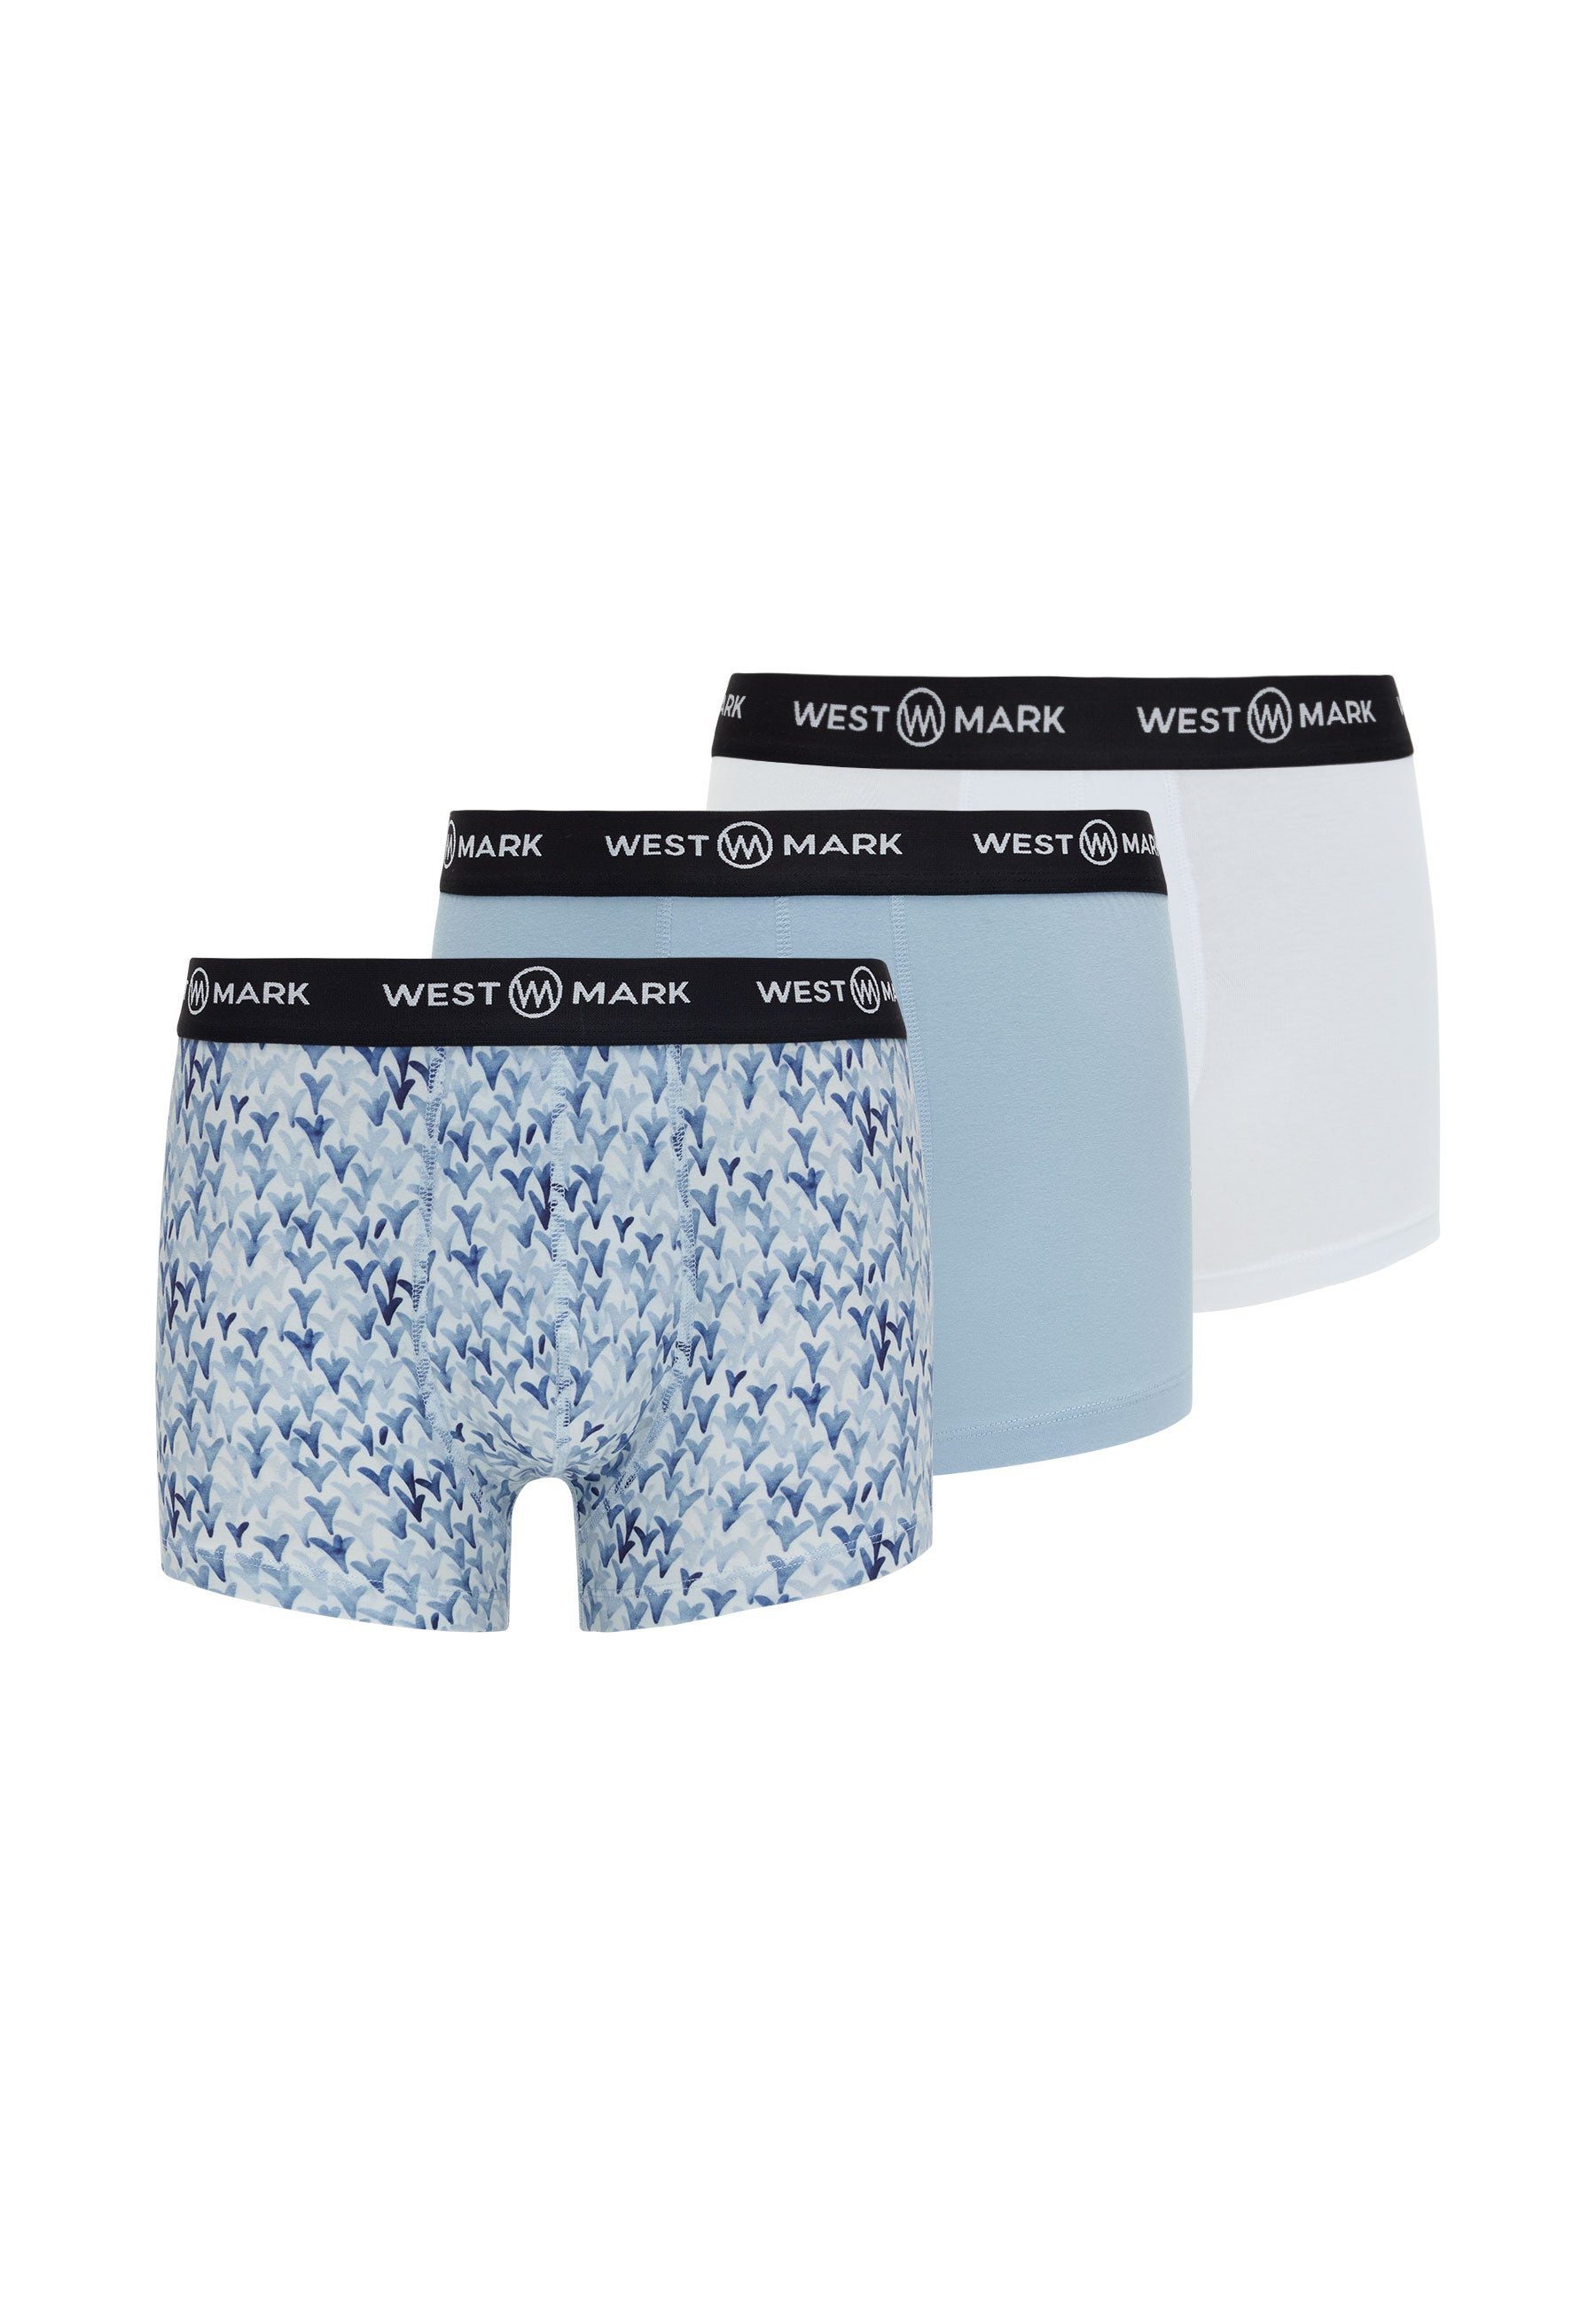 OSCAR 3-PACK WMABSTRACT in Light Blue, White